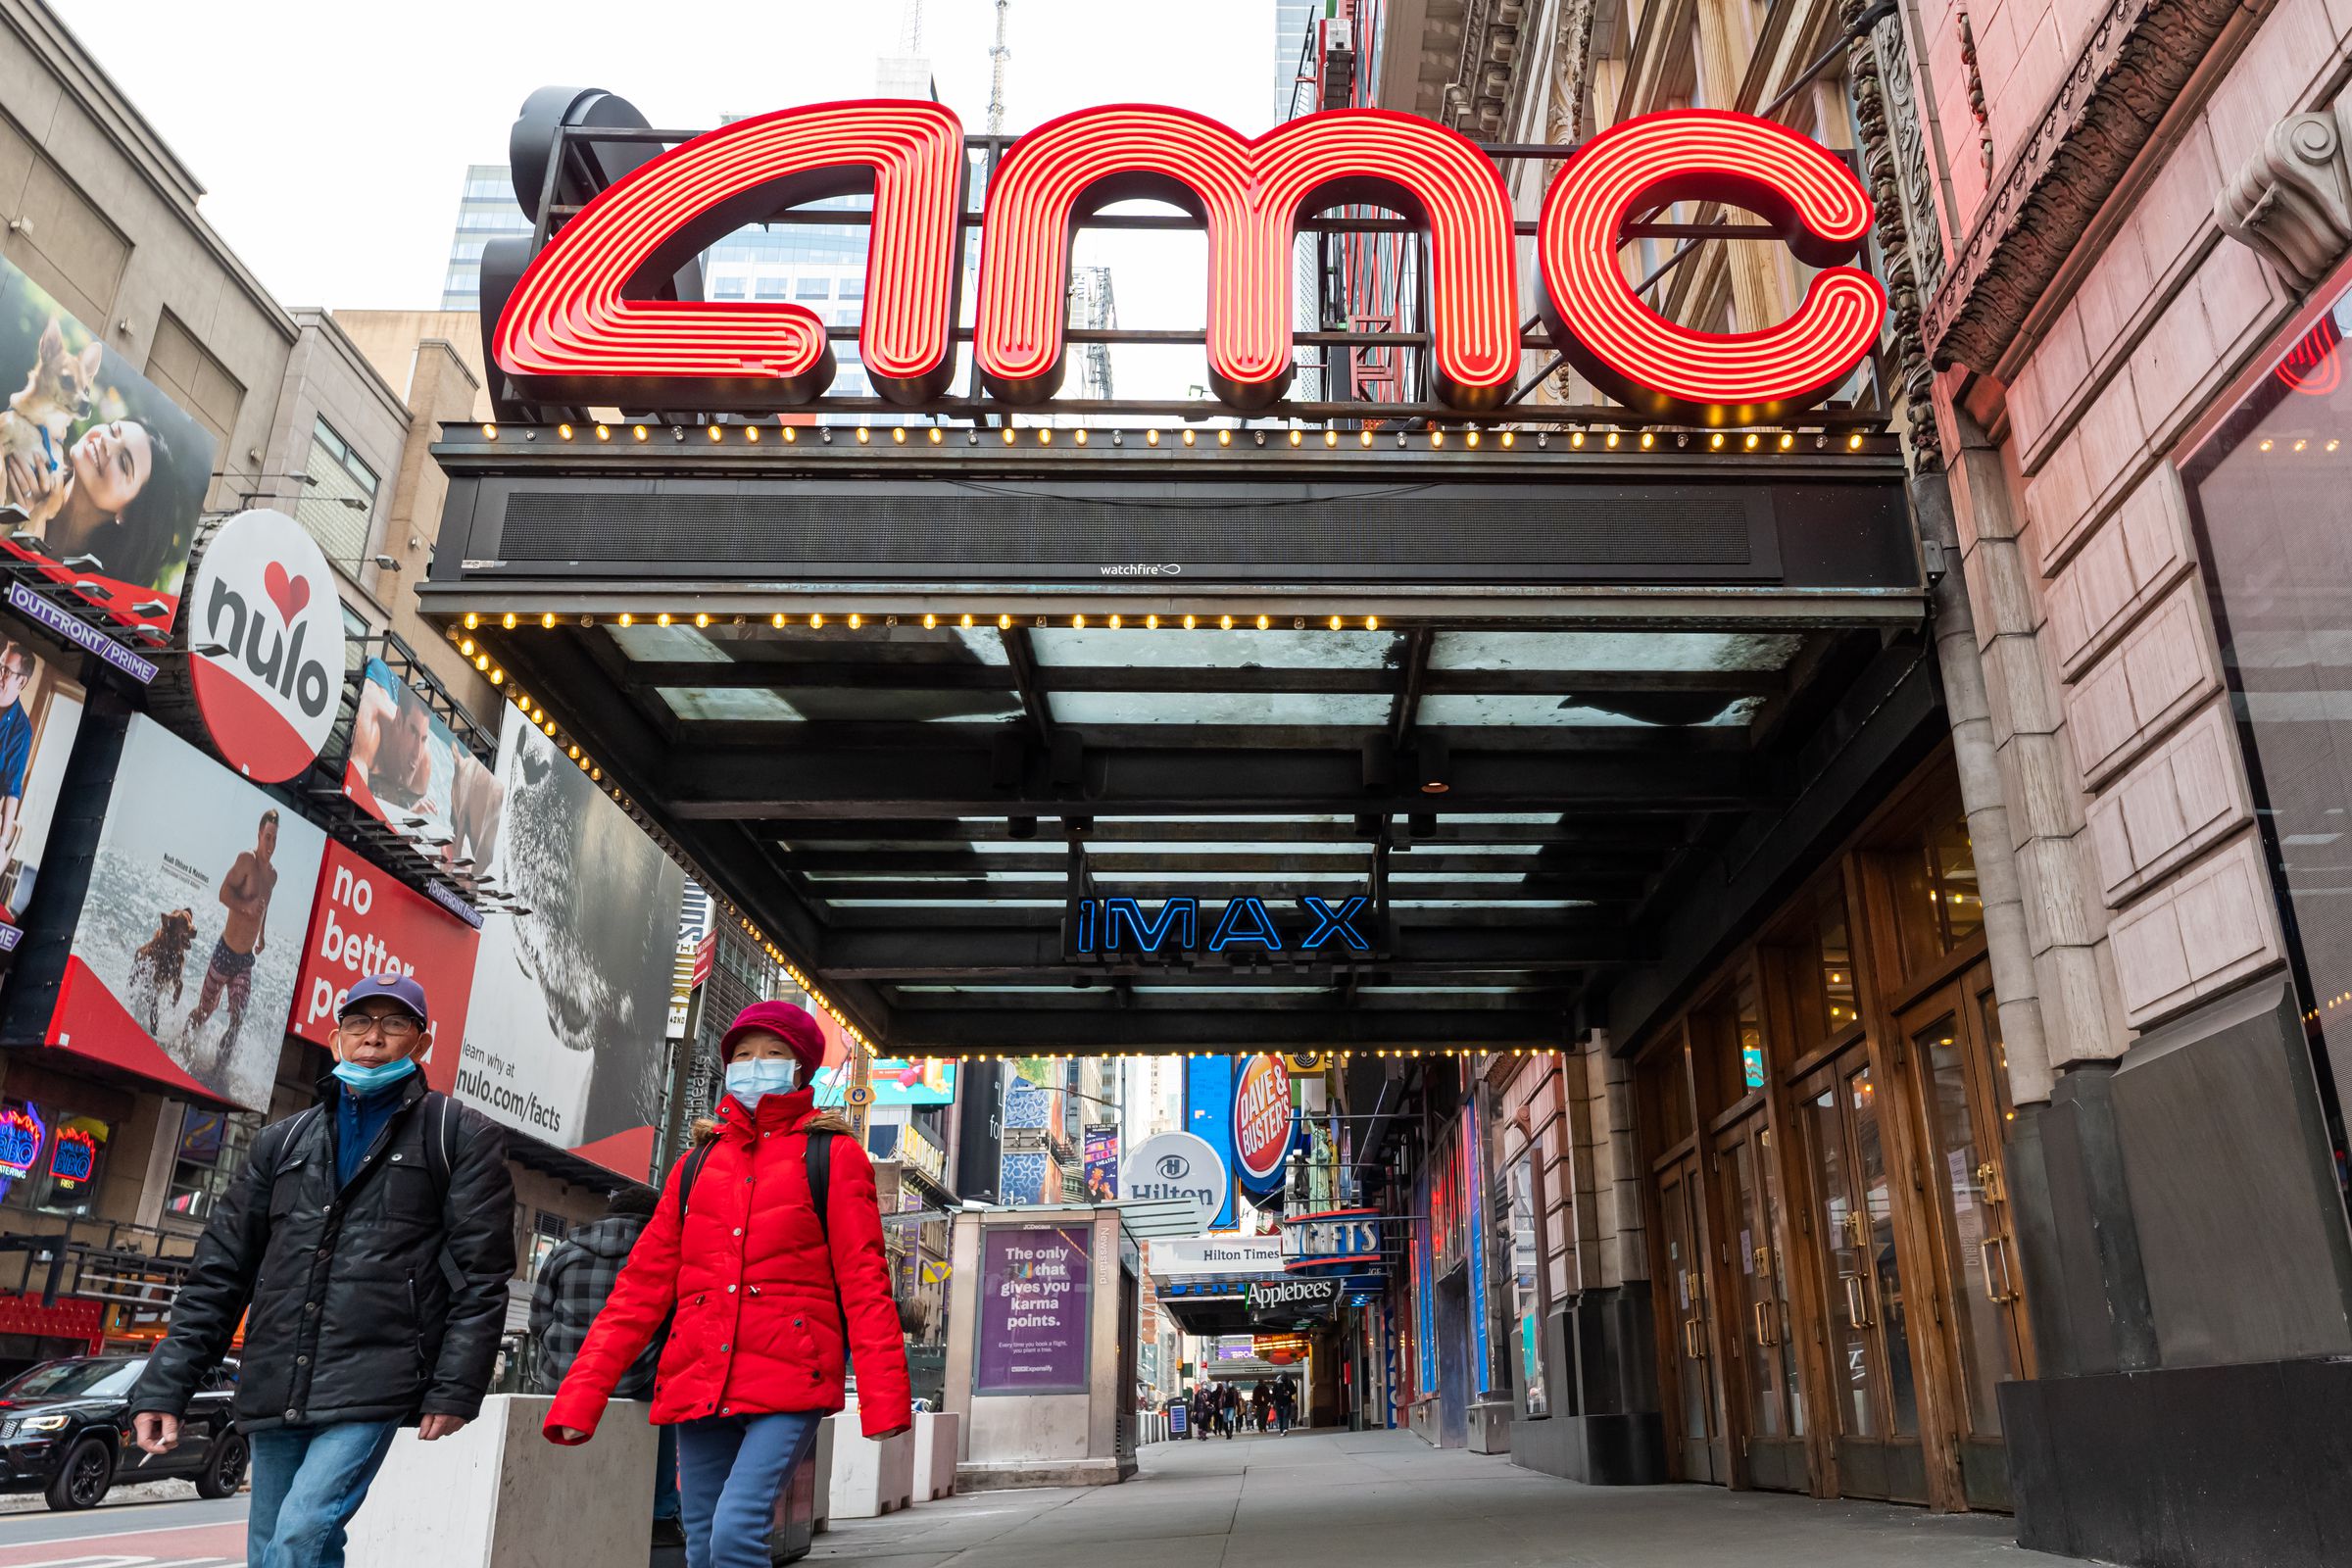 Entertainment &amp; Tourism Industries In New York City Struggle Under Pandemic Restrictions